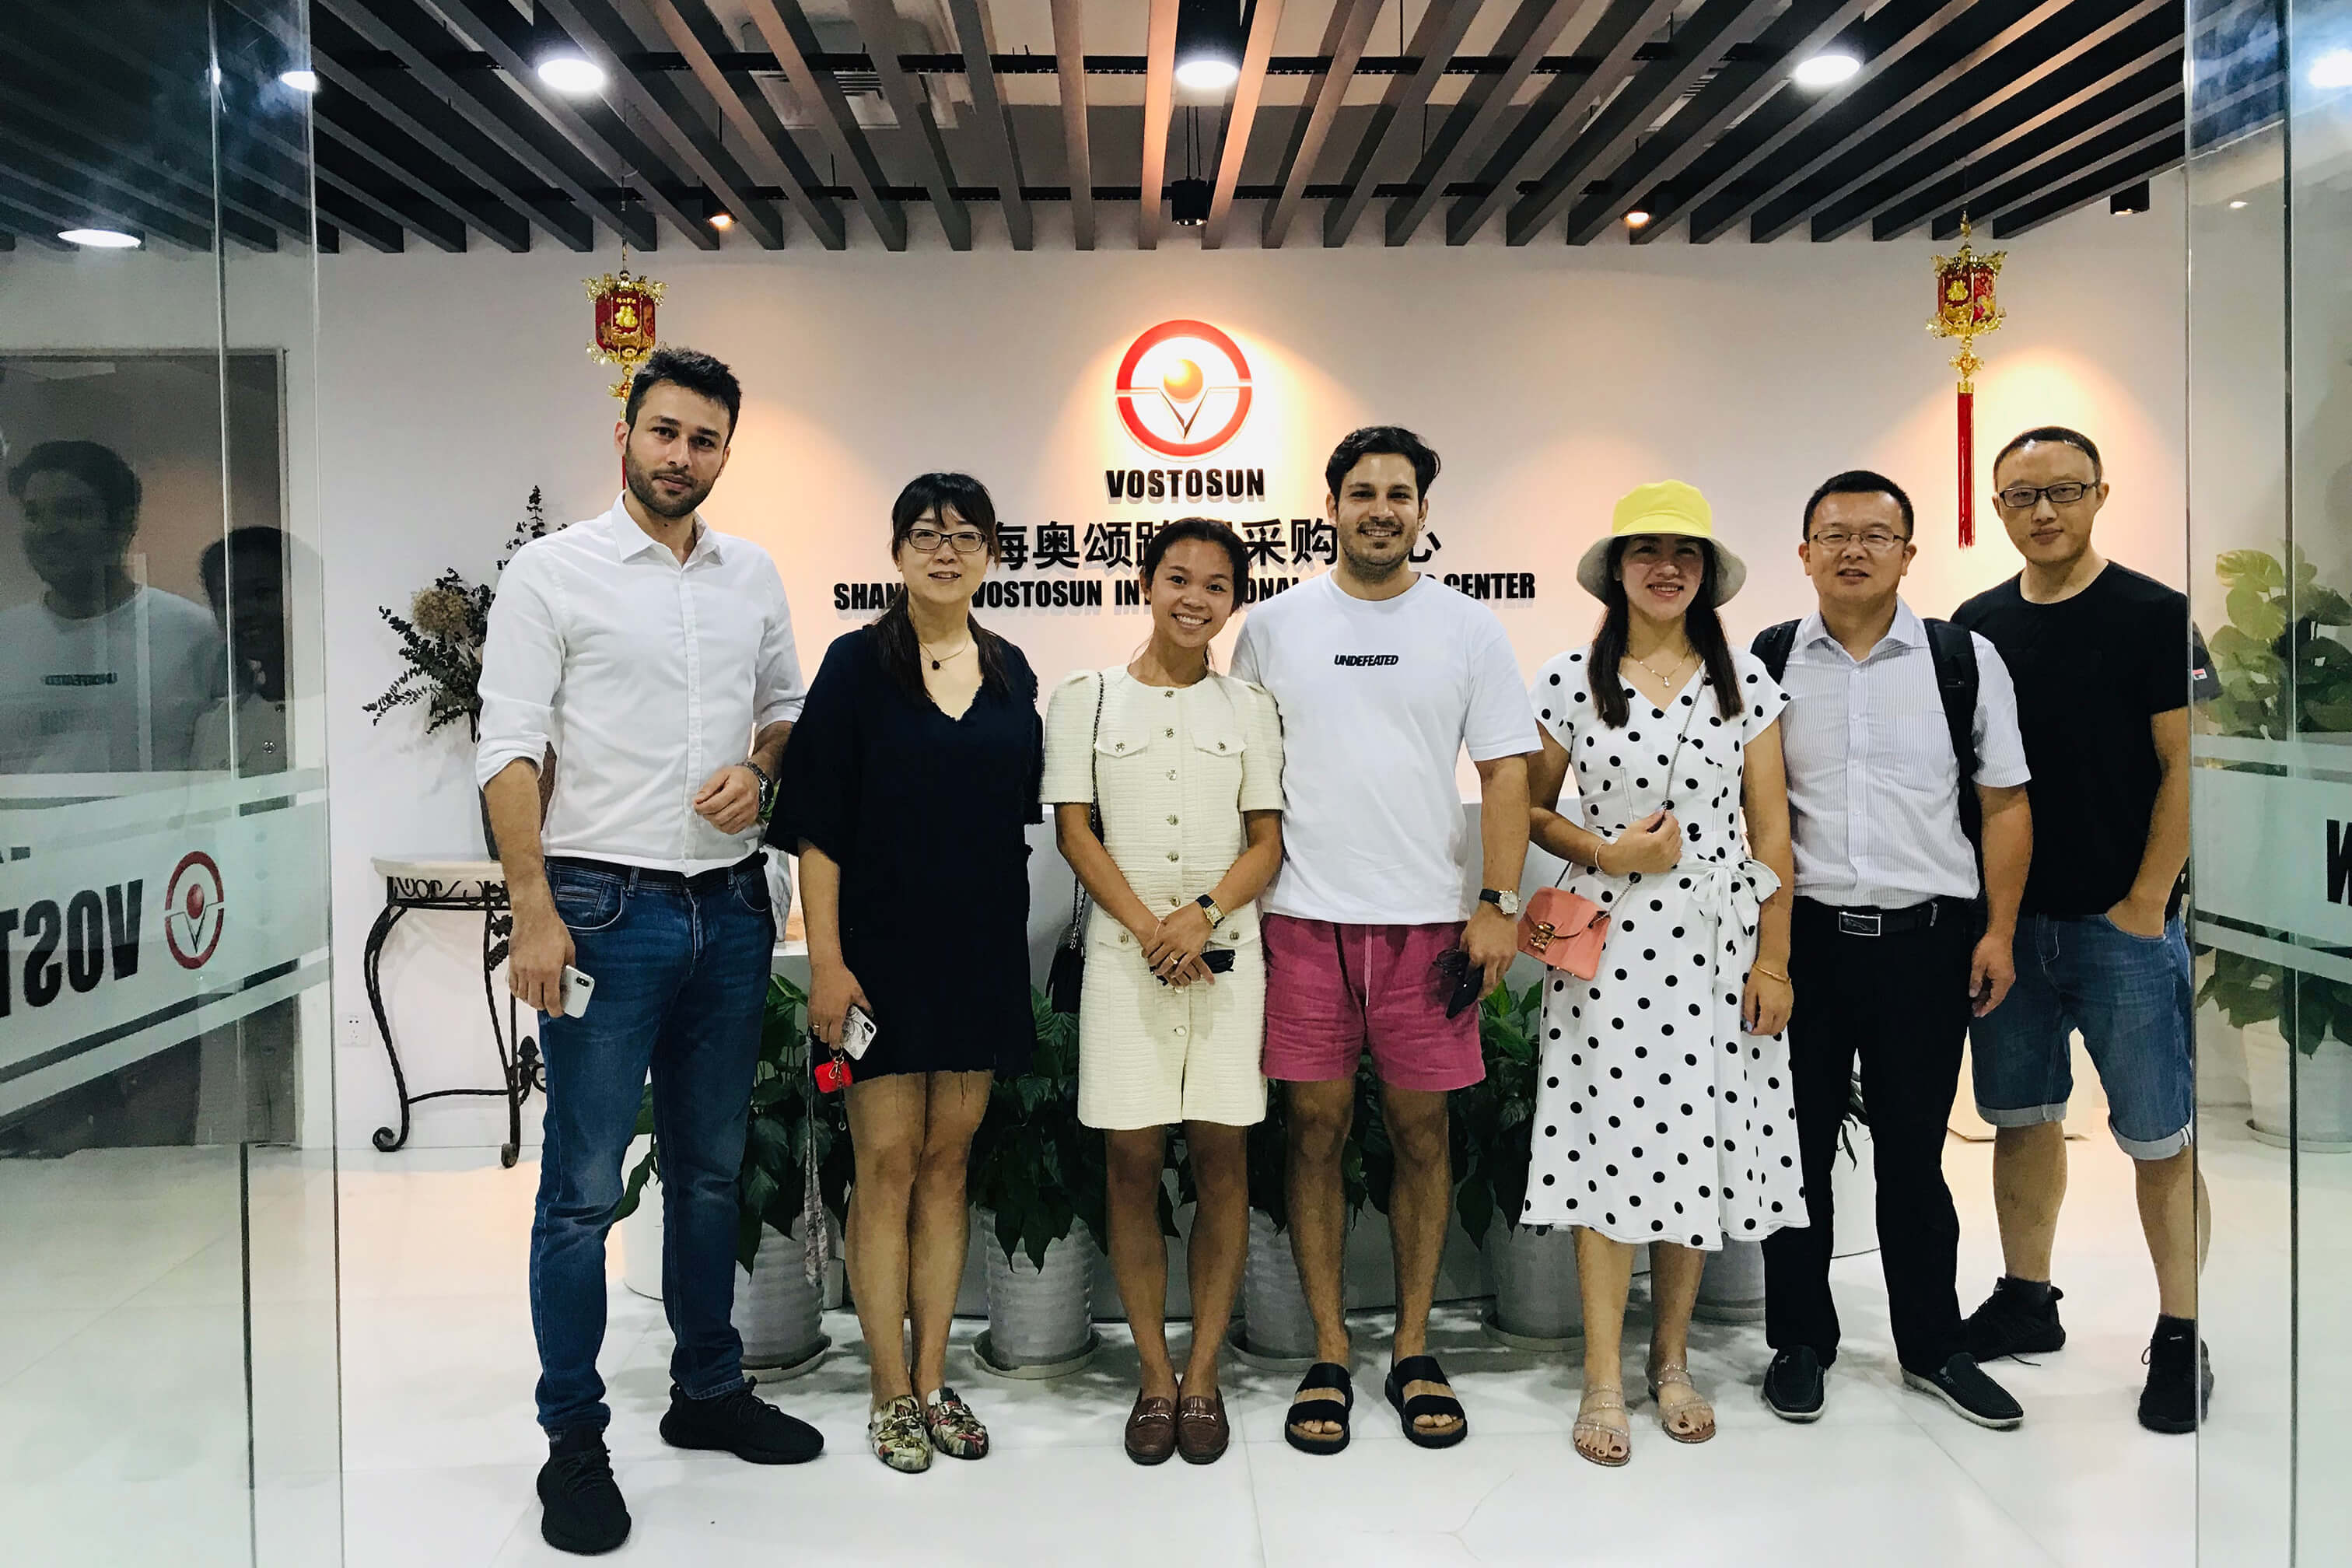 July 31, 2019, customers from Iran visited our company to discuss cooperation intentions.